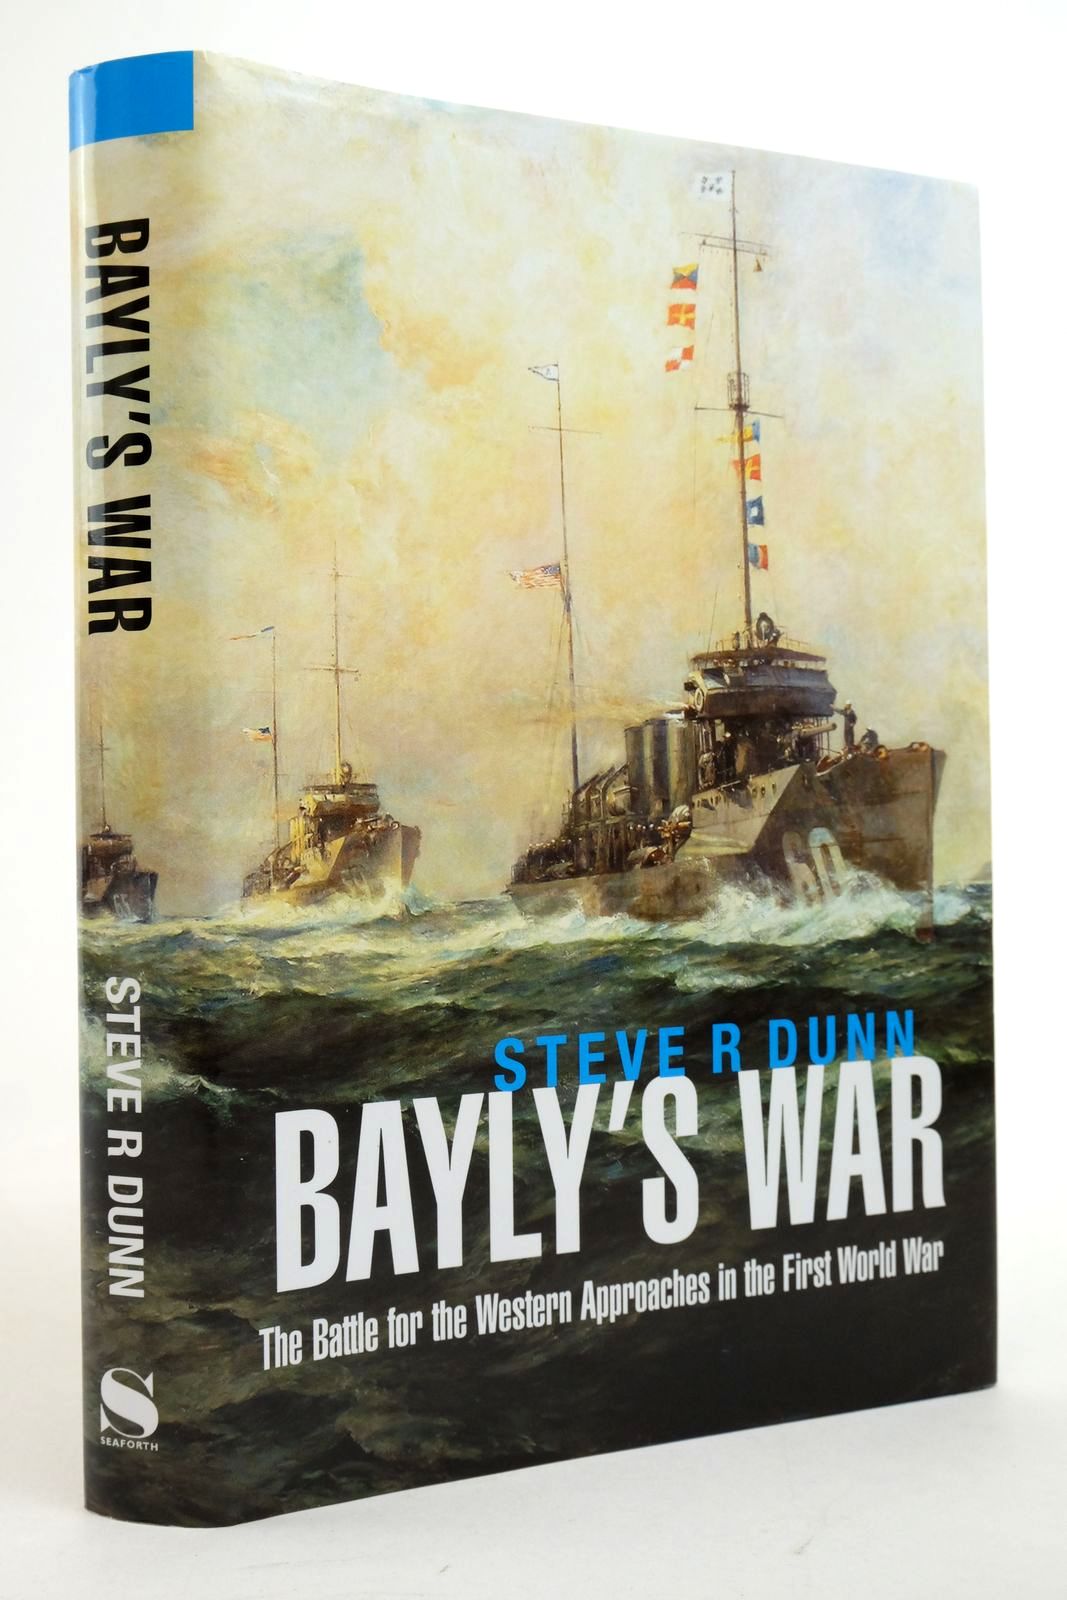 Photo of BAYLY'S WAR: THE BATTLE FOR THE WESTERN APPROACHES IN THE FIRST WORLD WAR written by Dunn, Steve R. published by Seaforth Publishing (STOCK CODE: 2138330)  for sale by Stella & Rose's Books